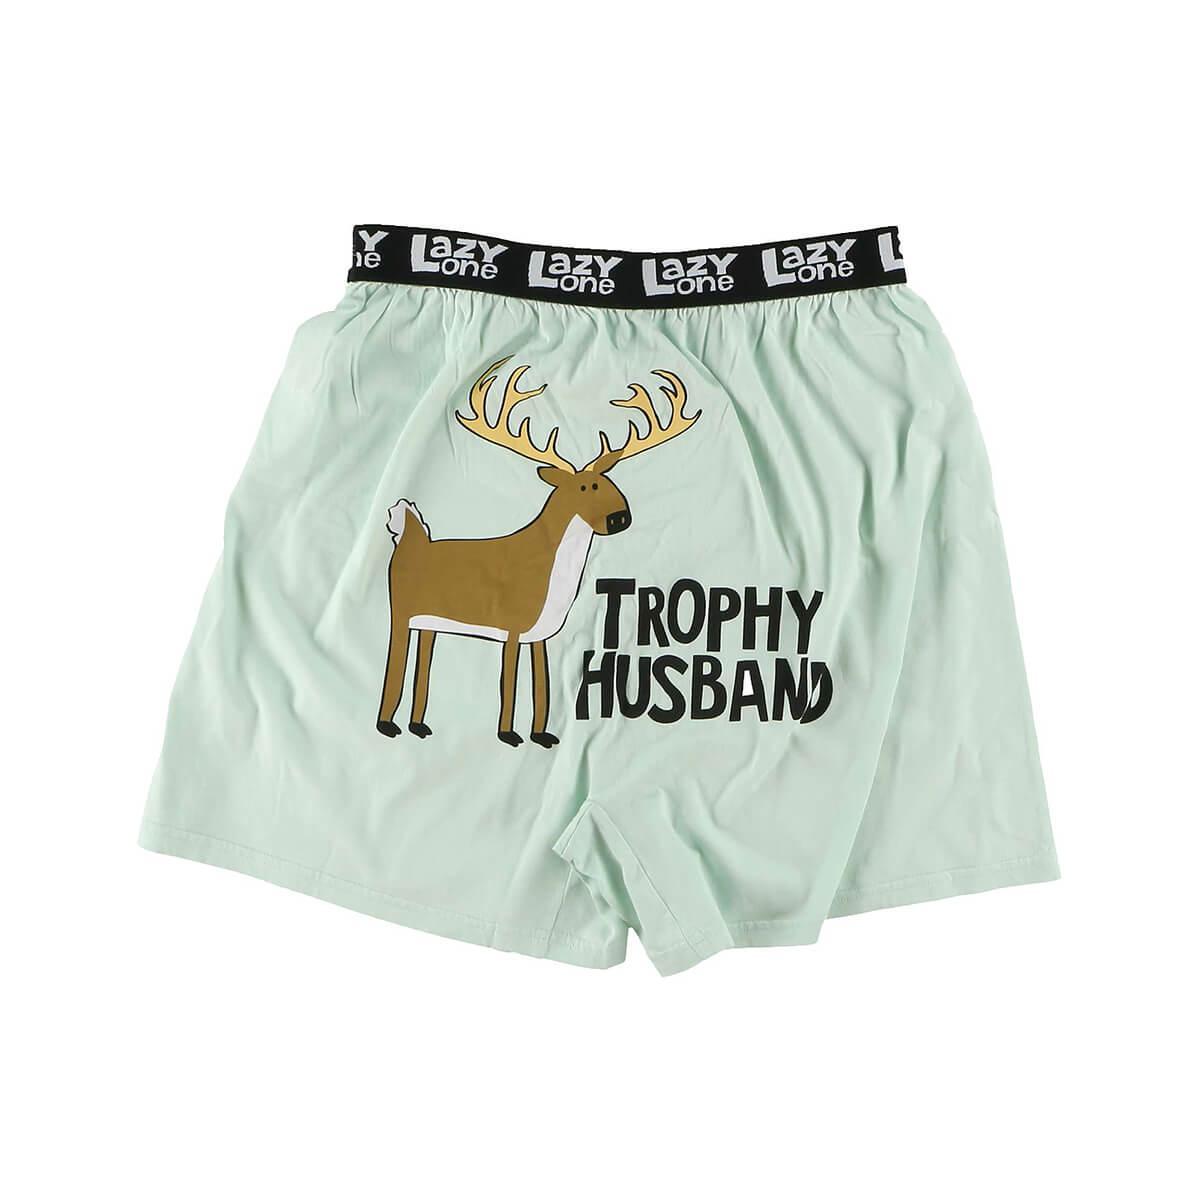 25 Best Boxer Shorts to Use as Stocking Stuffers for Your Husband